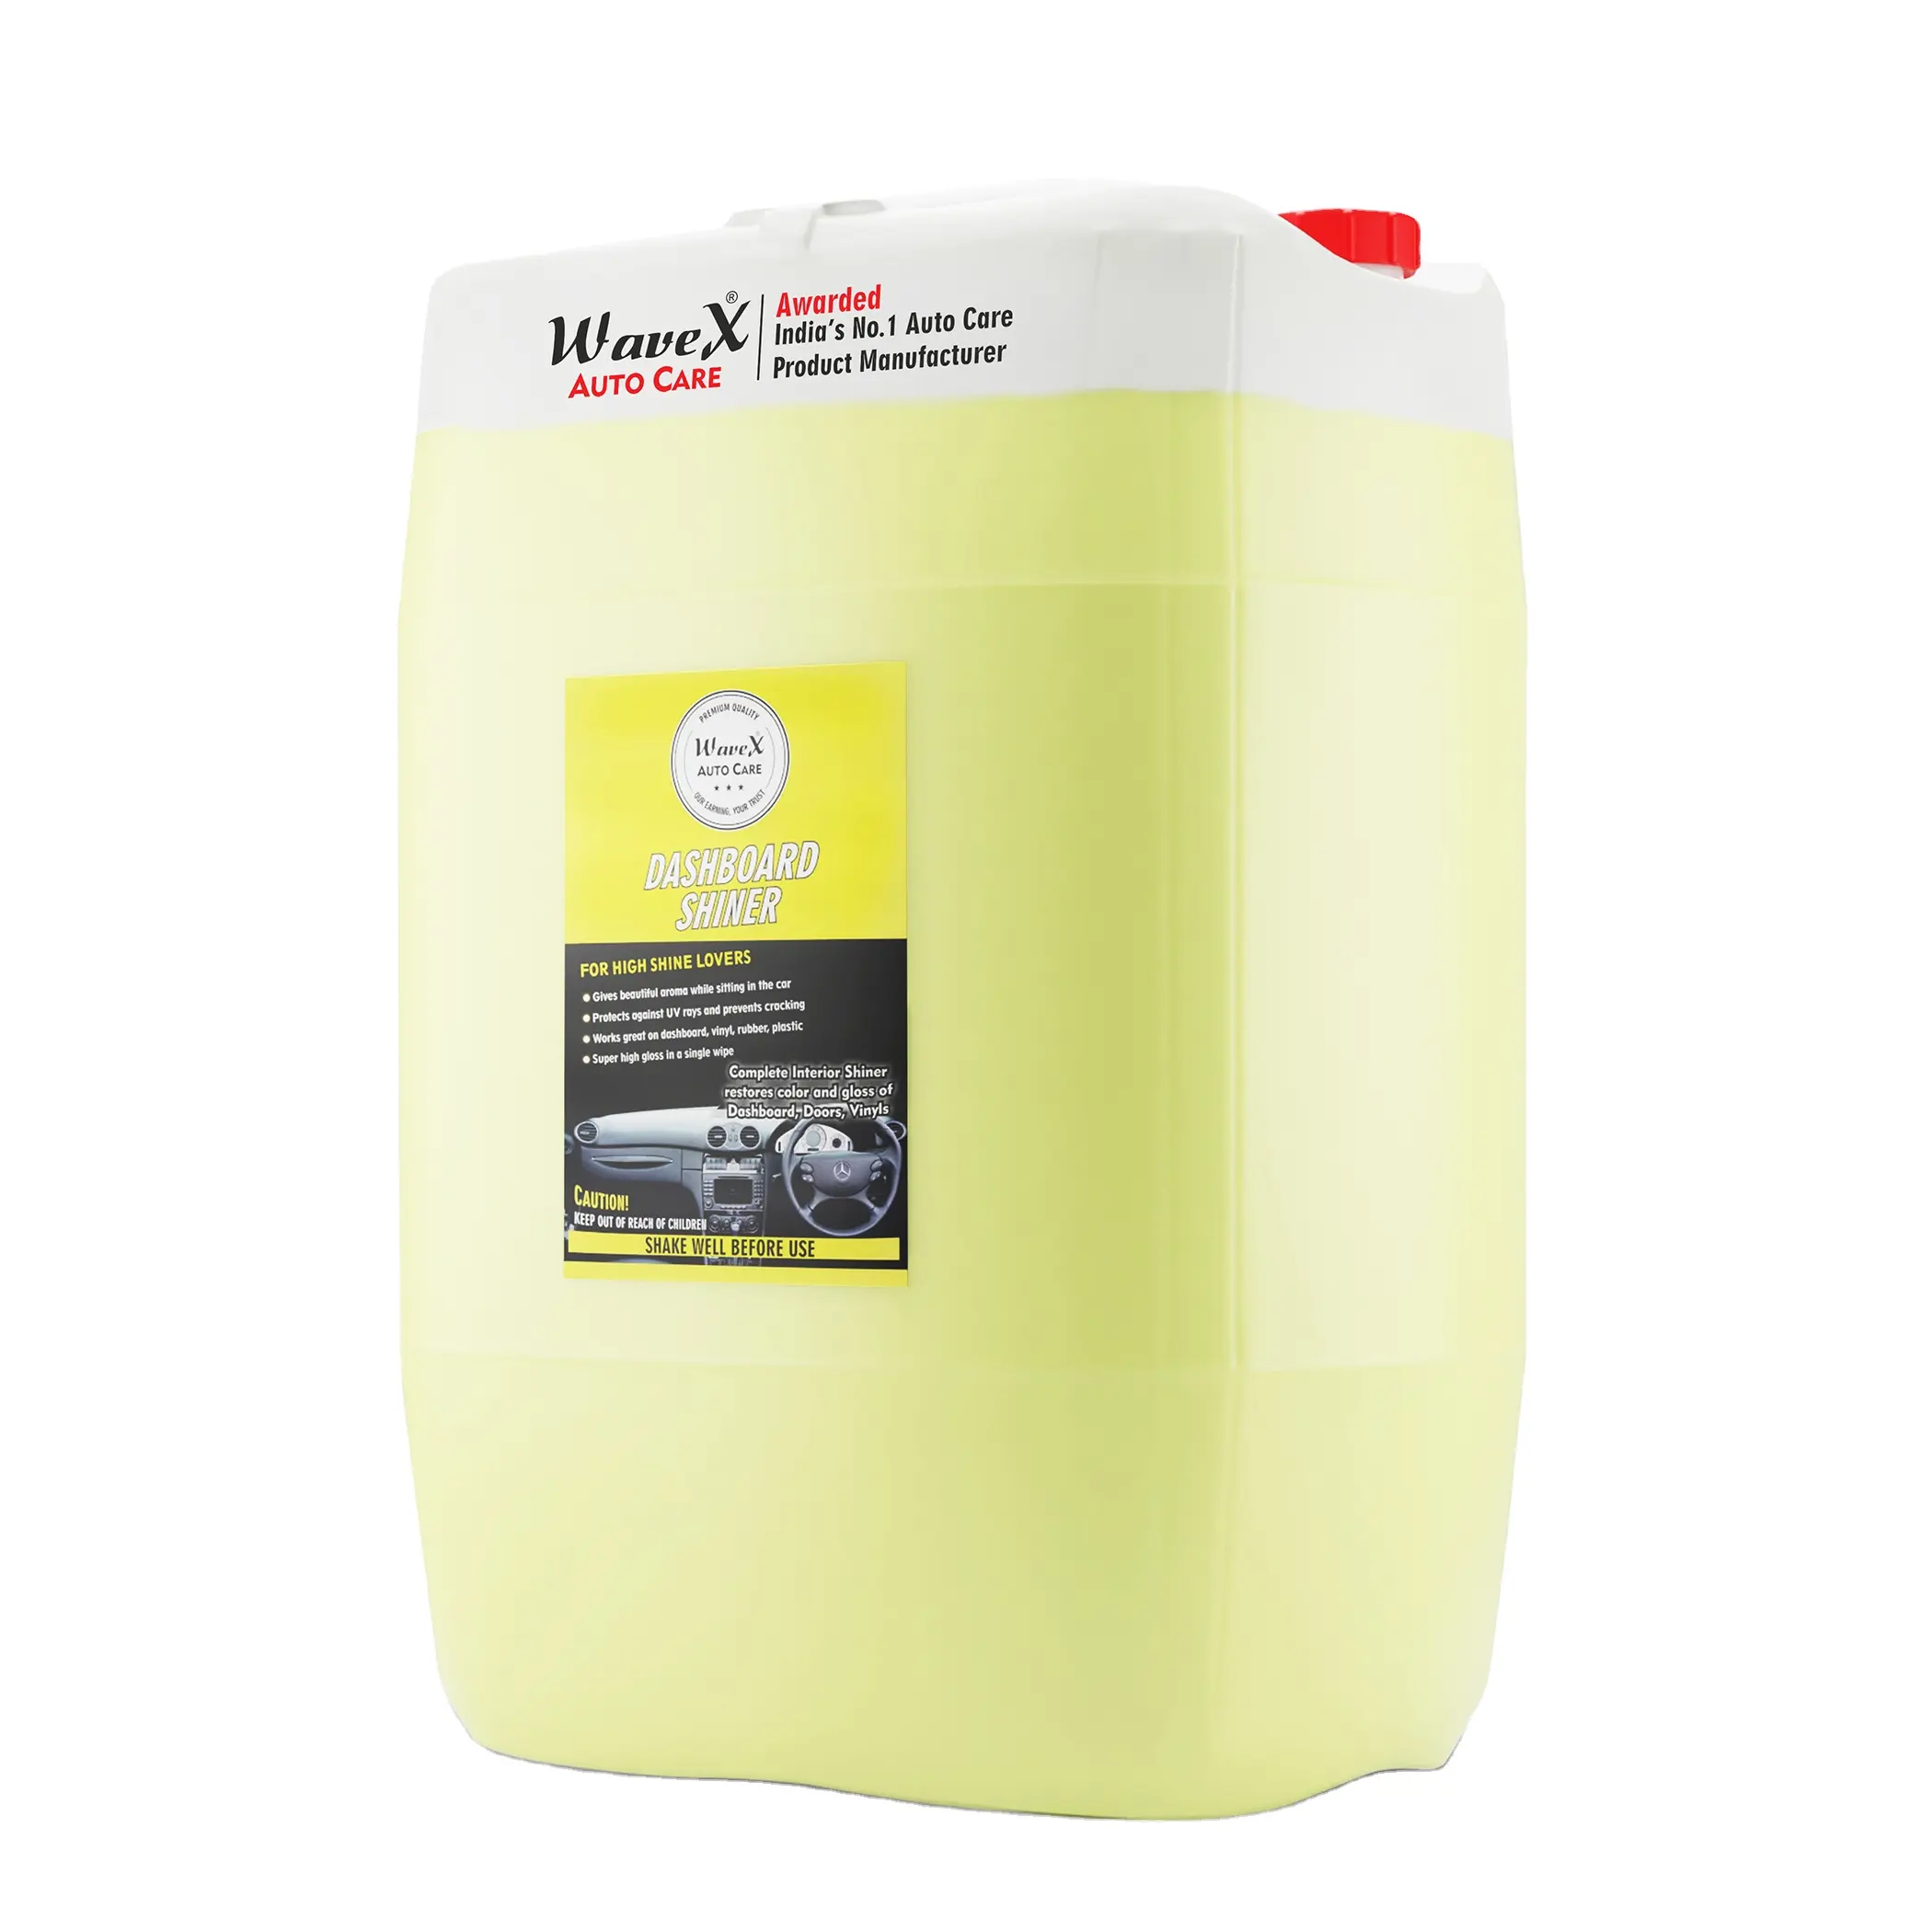 Wavex Dashboard Shiner 20 LTR Car Interior Polish | Prevents dashboard from cracking over time